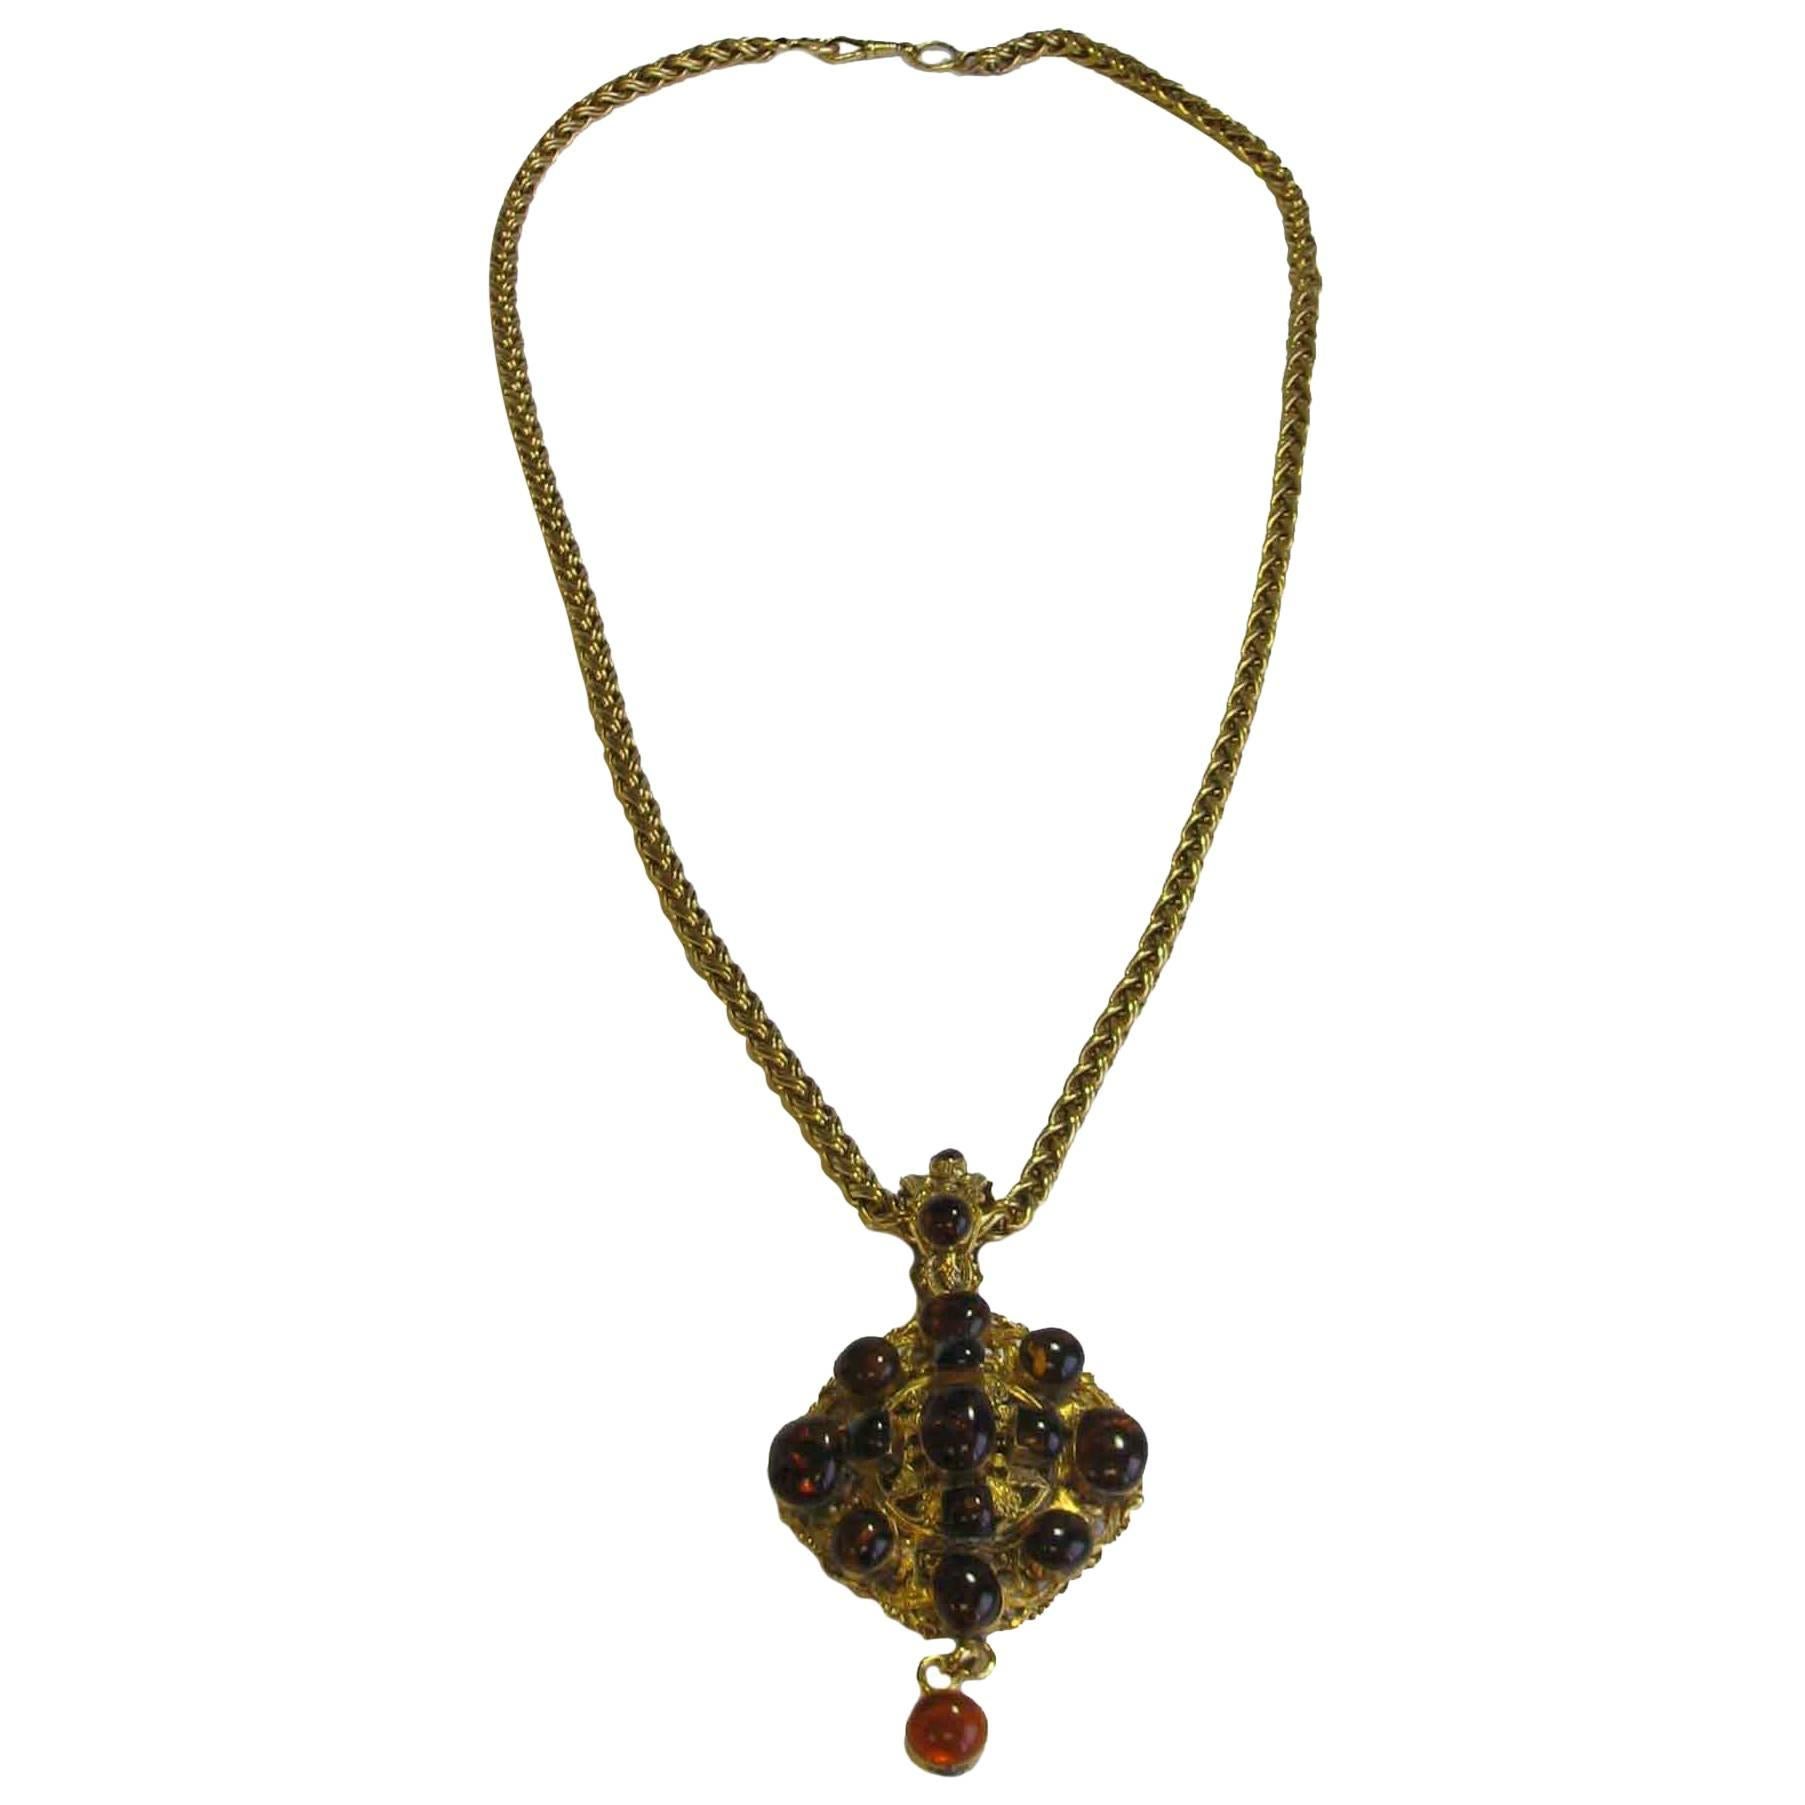 MARGUERITE DE VALOIS Necklace in Gilded Metal and Pendant in Topaze Molten Glass